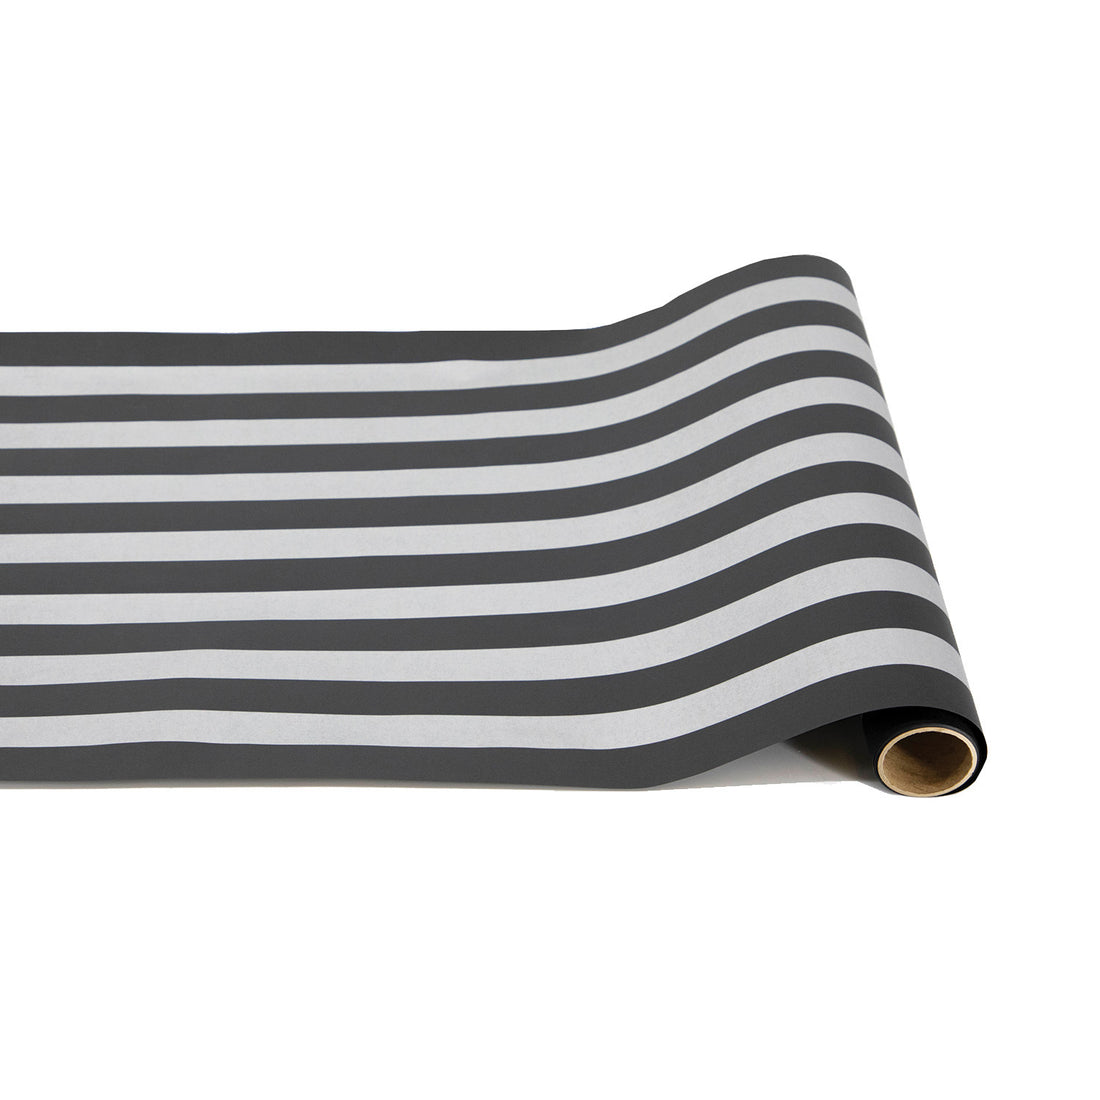 Paper roll with thick black and silver stripes running down the length of the paper.